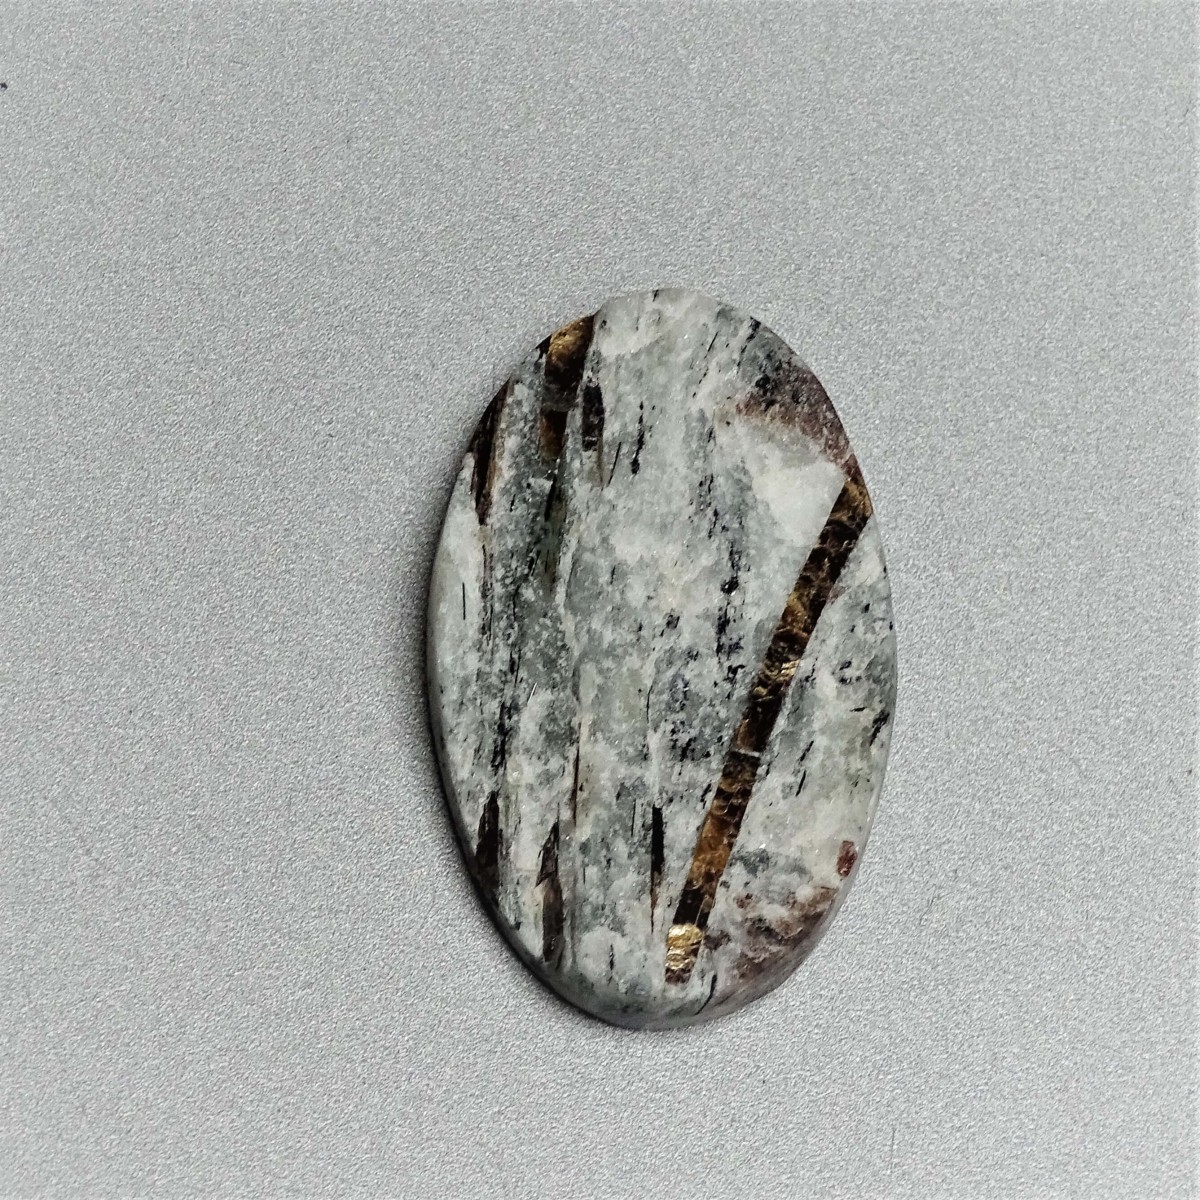 Astrophyllite cabochon natural unpolished mineral 10.1g, Russia